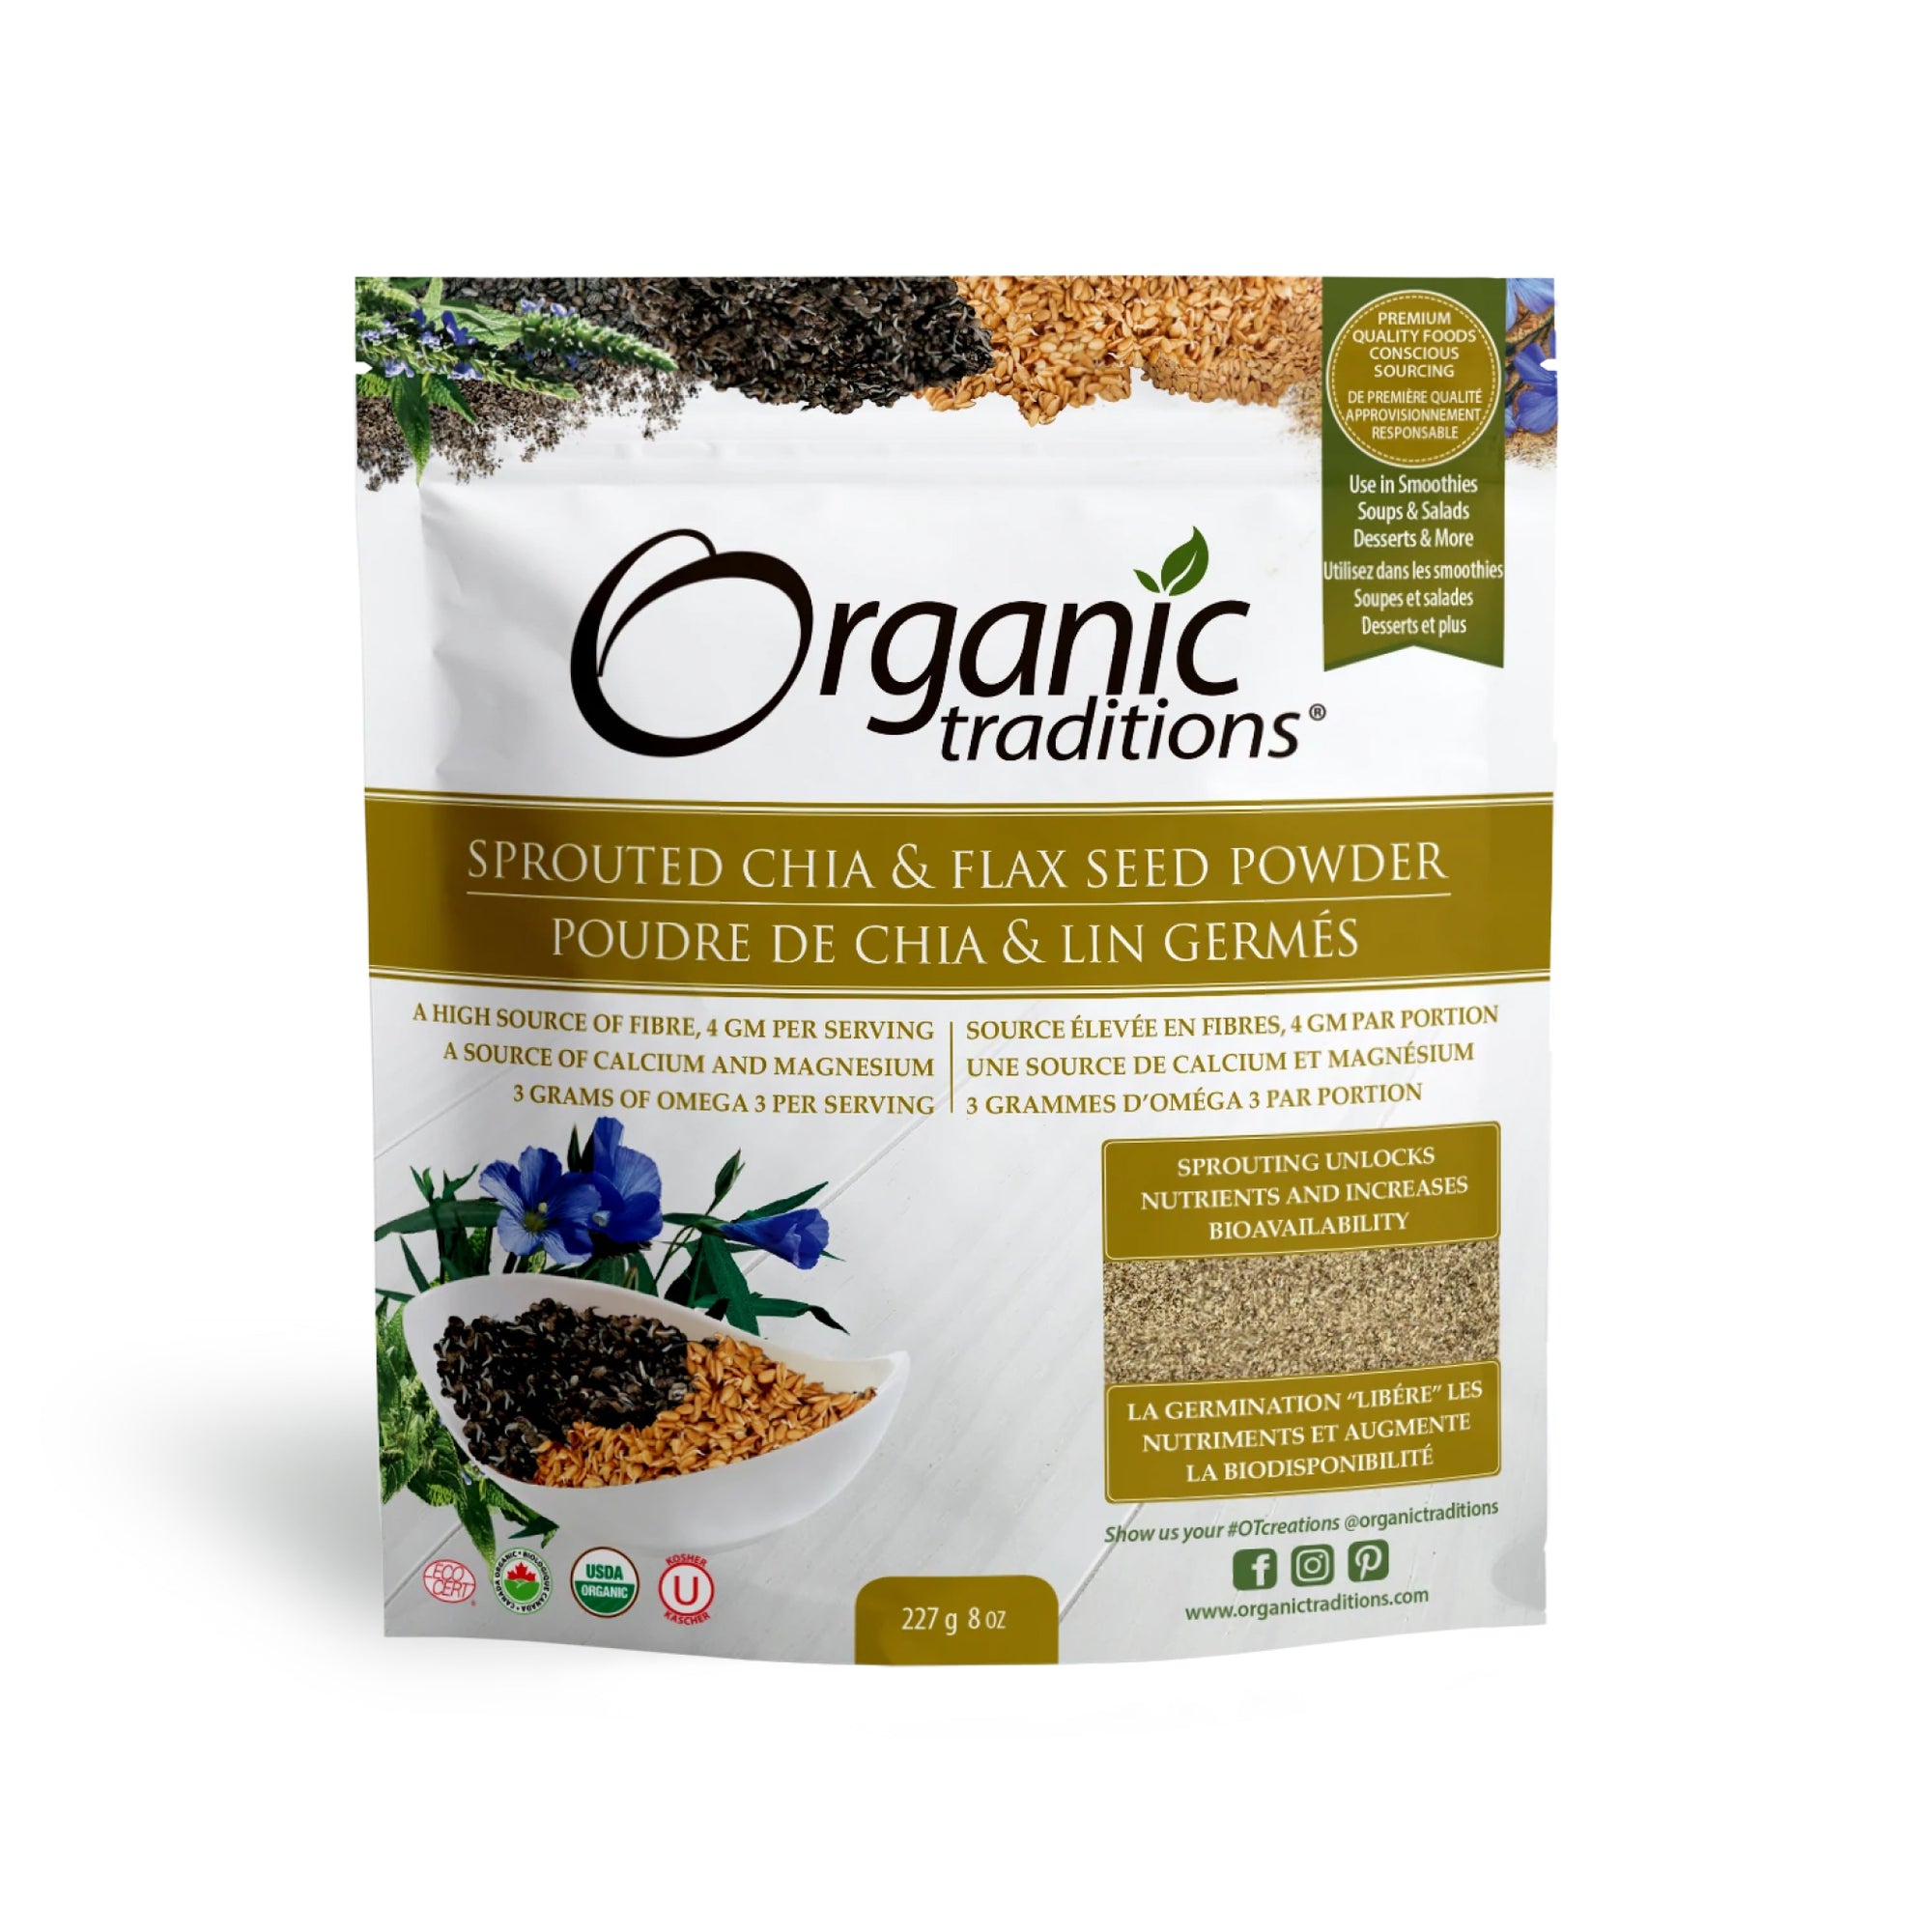 Organic Traditions Organic Sprouted Chia & Flax Powder 227g